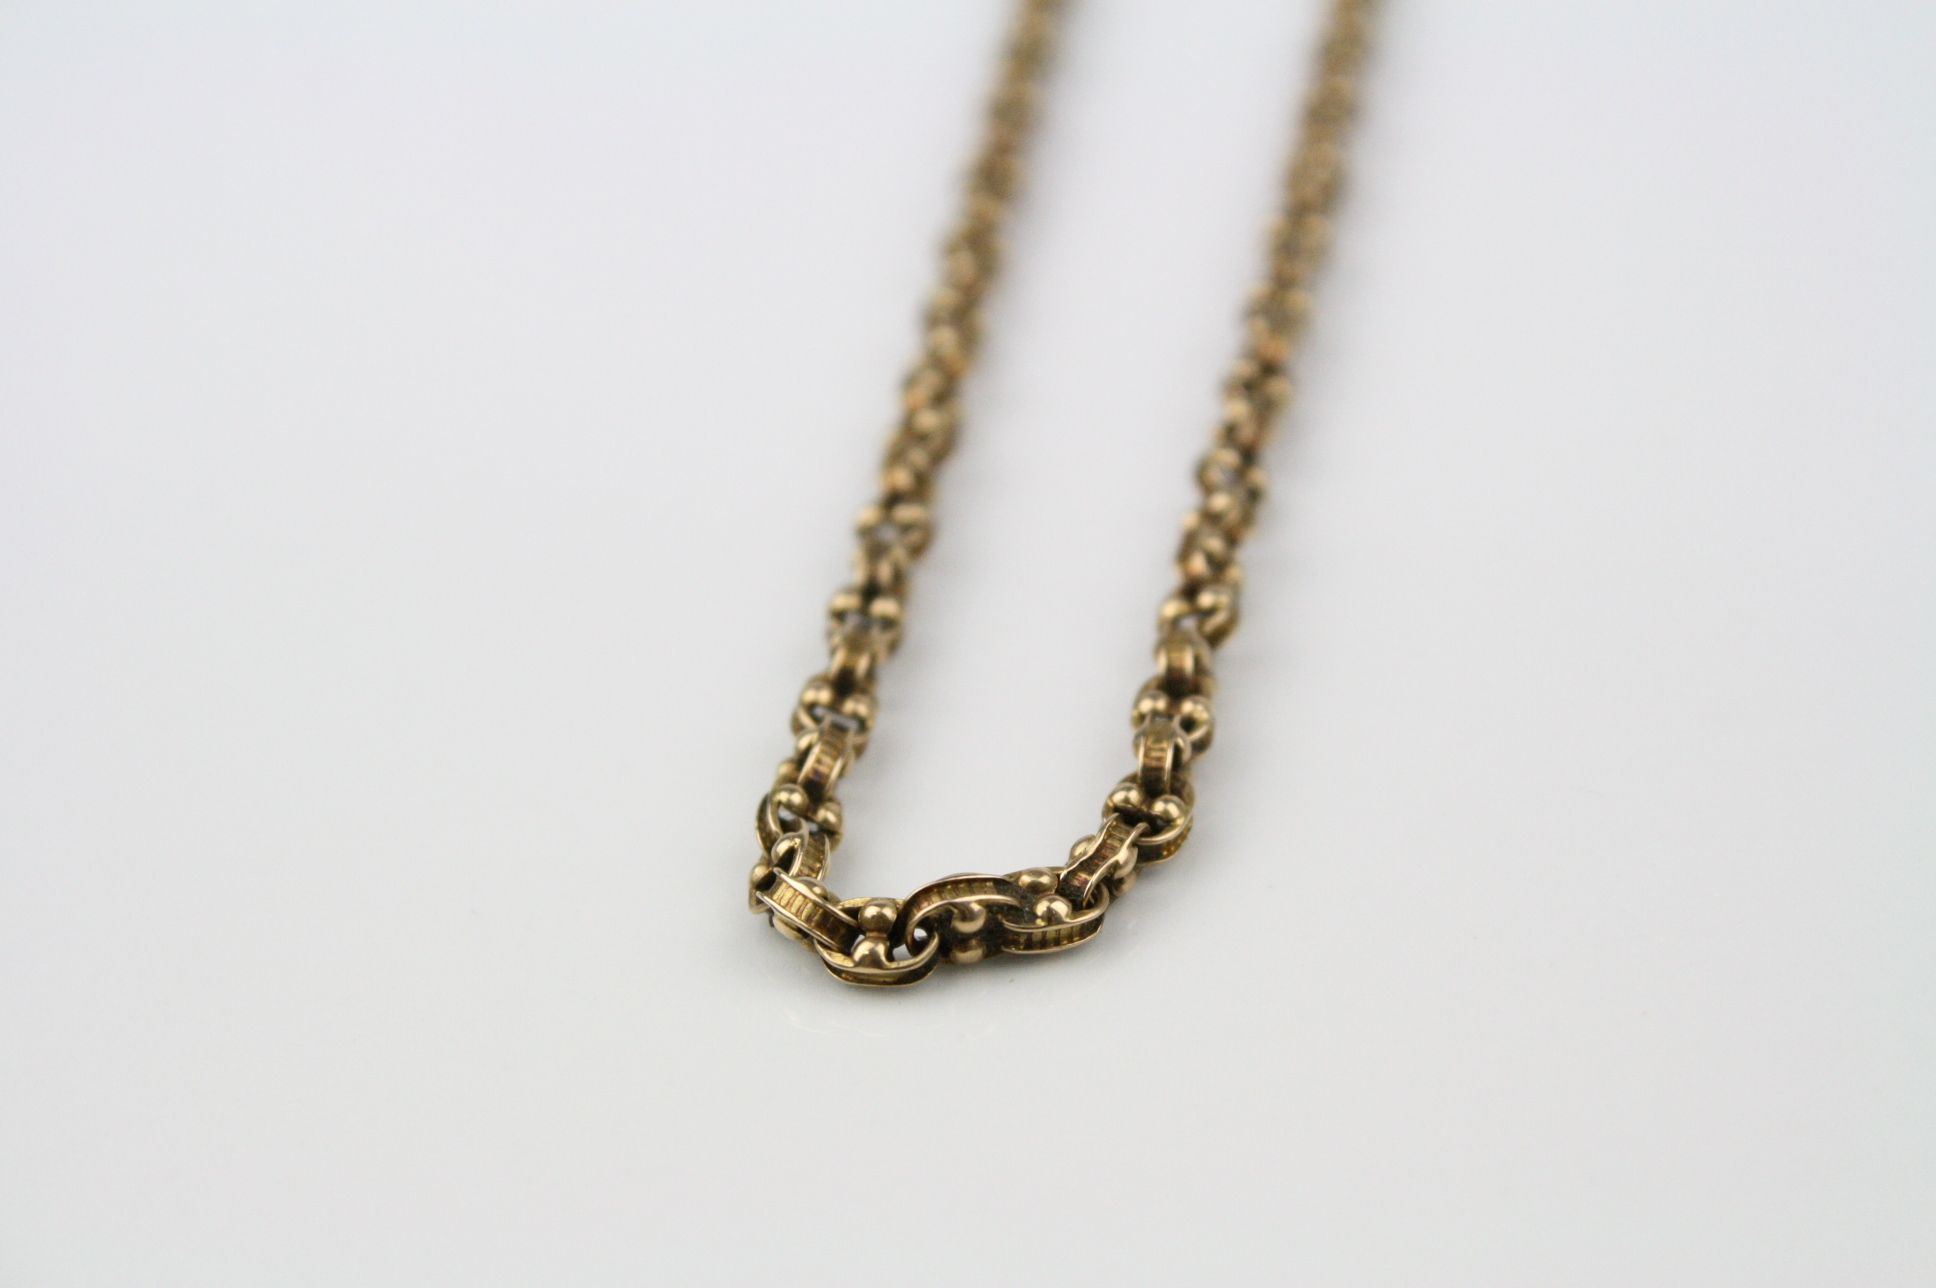 Victorian yellow metal fancy belcher link chain, missing clasp, length approximately 50cm - Image 2 of 4